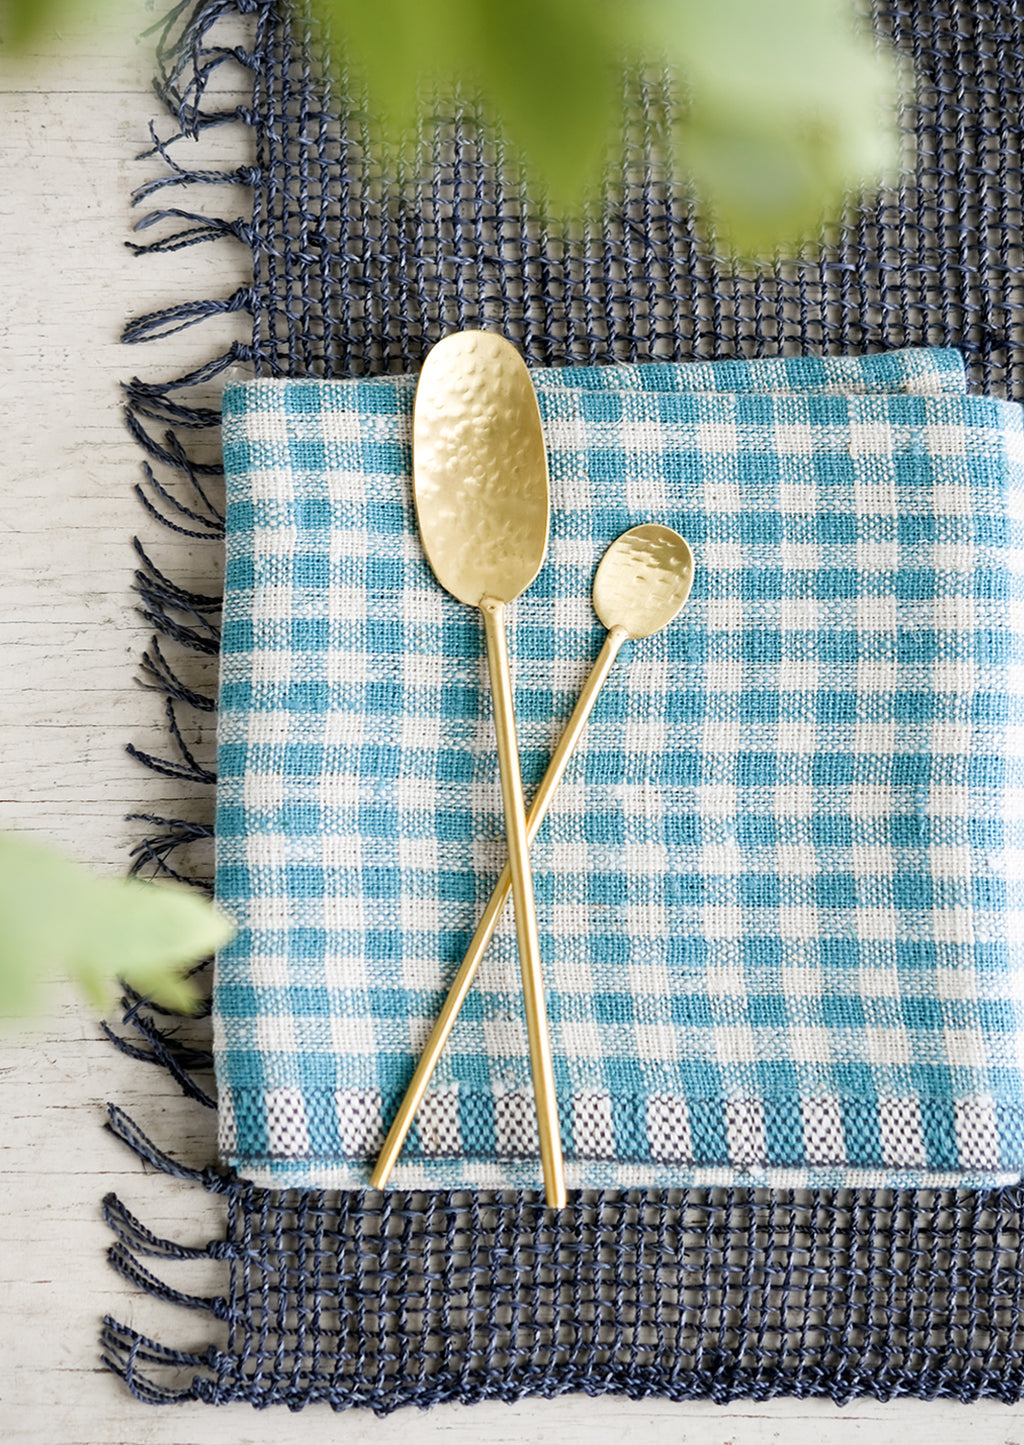 2: Hammered gold spoons on a blue gingham cloth.